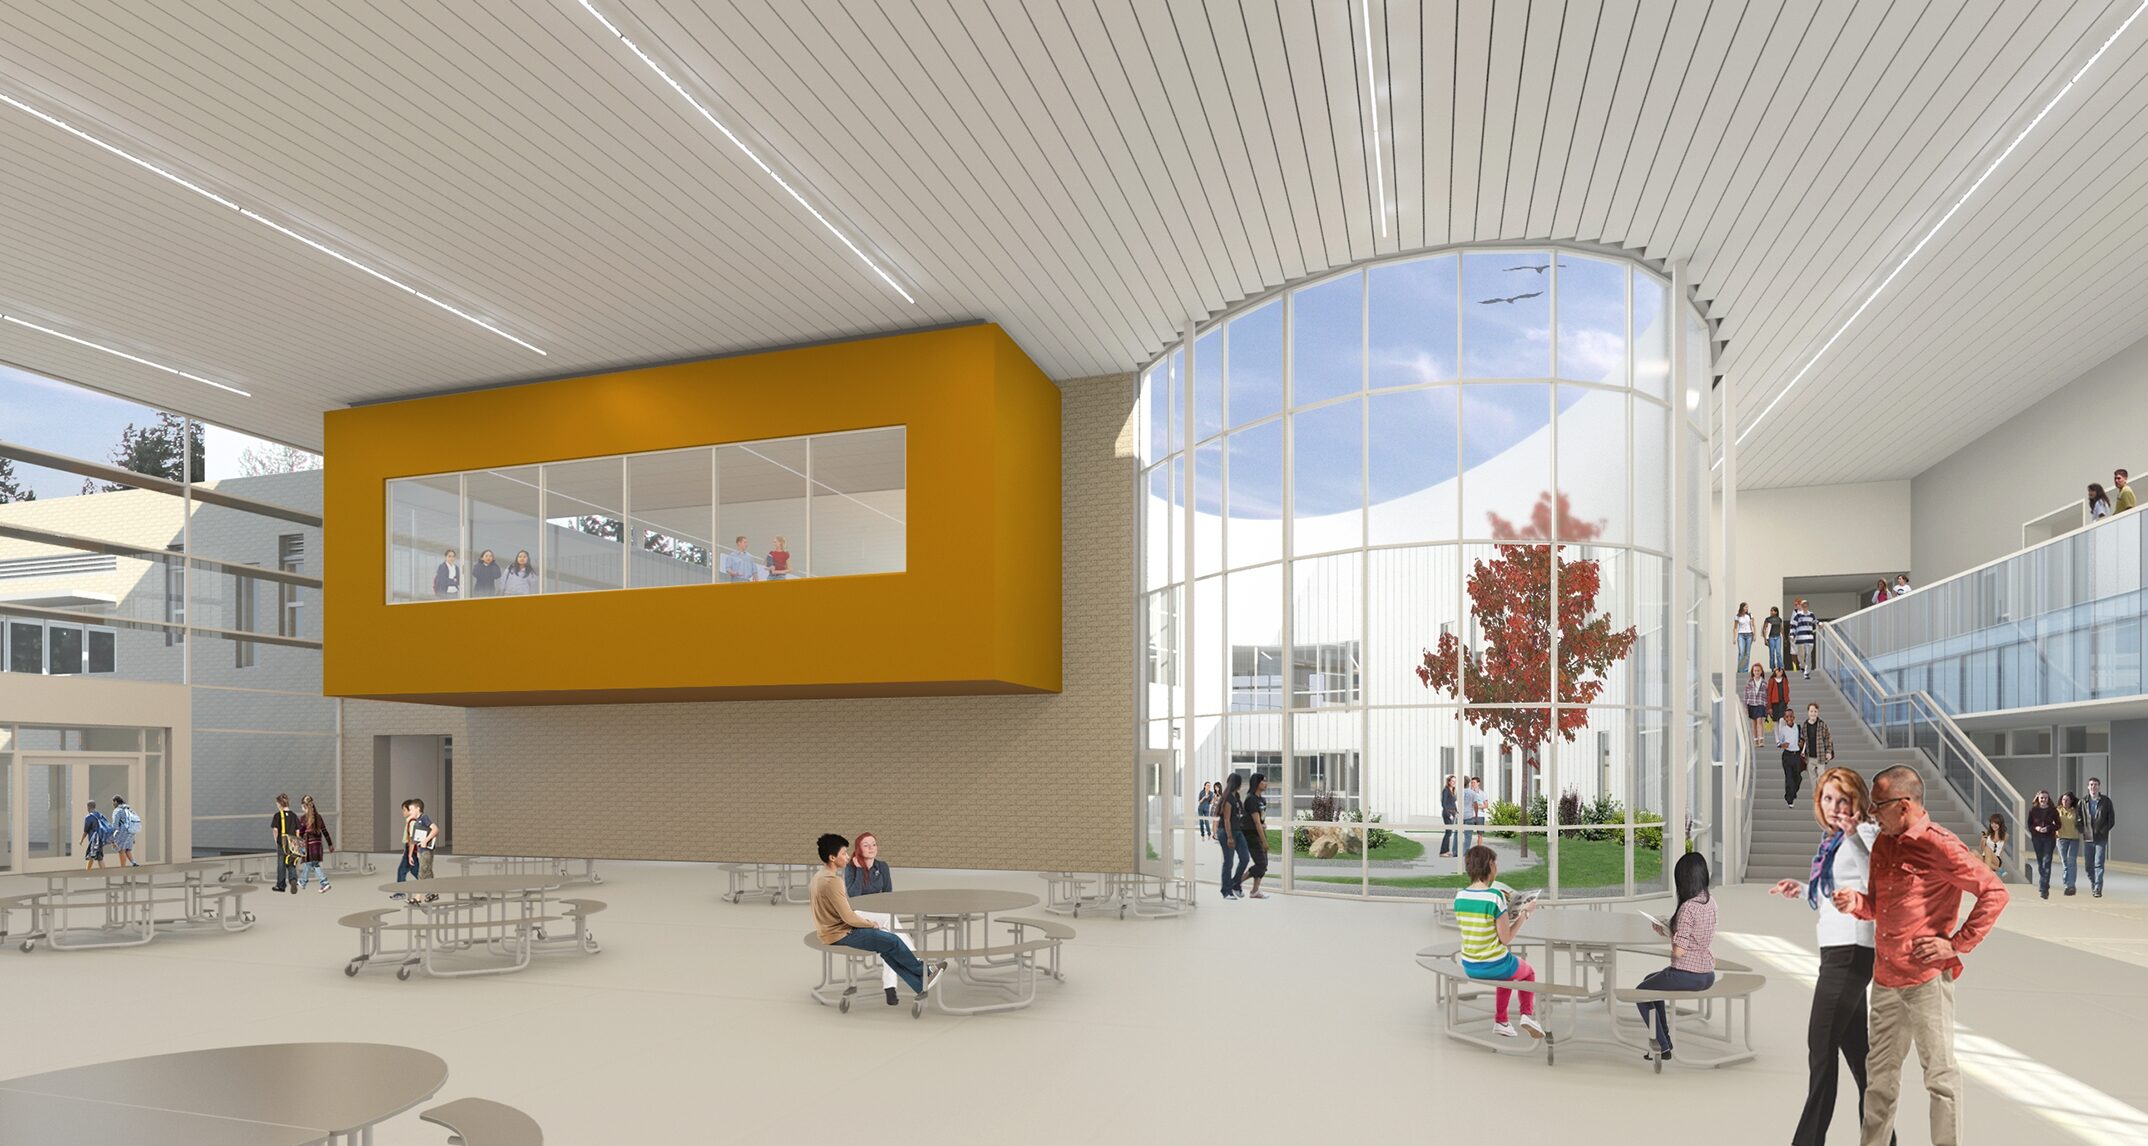 The commons and surrounding spaces at the new Tillicum Middle School will provide a variety of options for students to suit their needs. — NAC Architecture